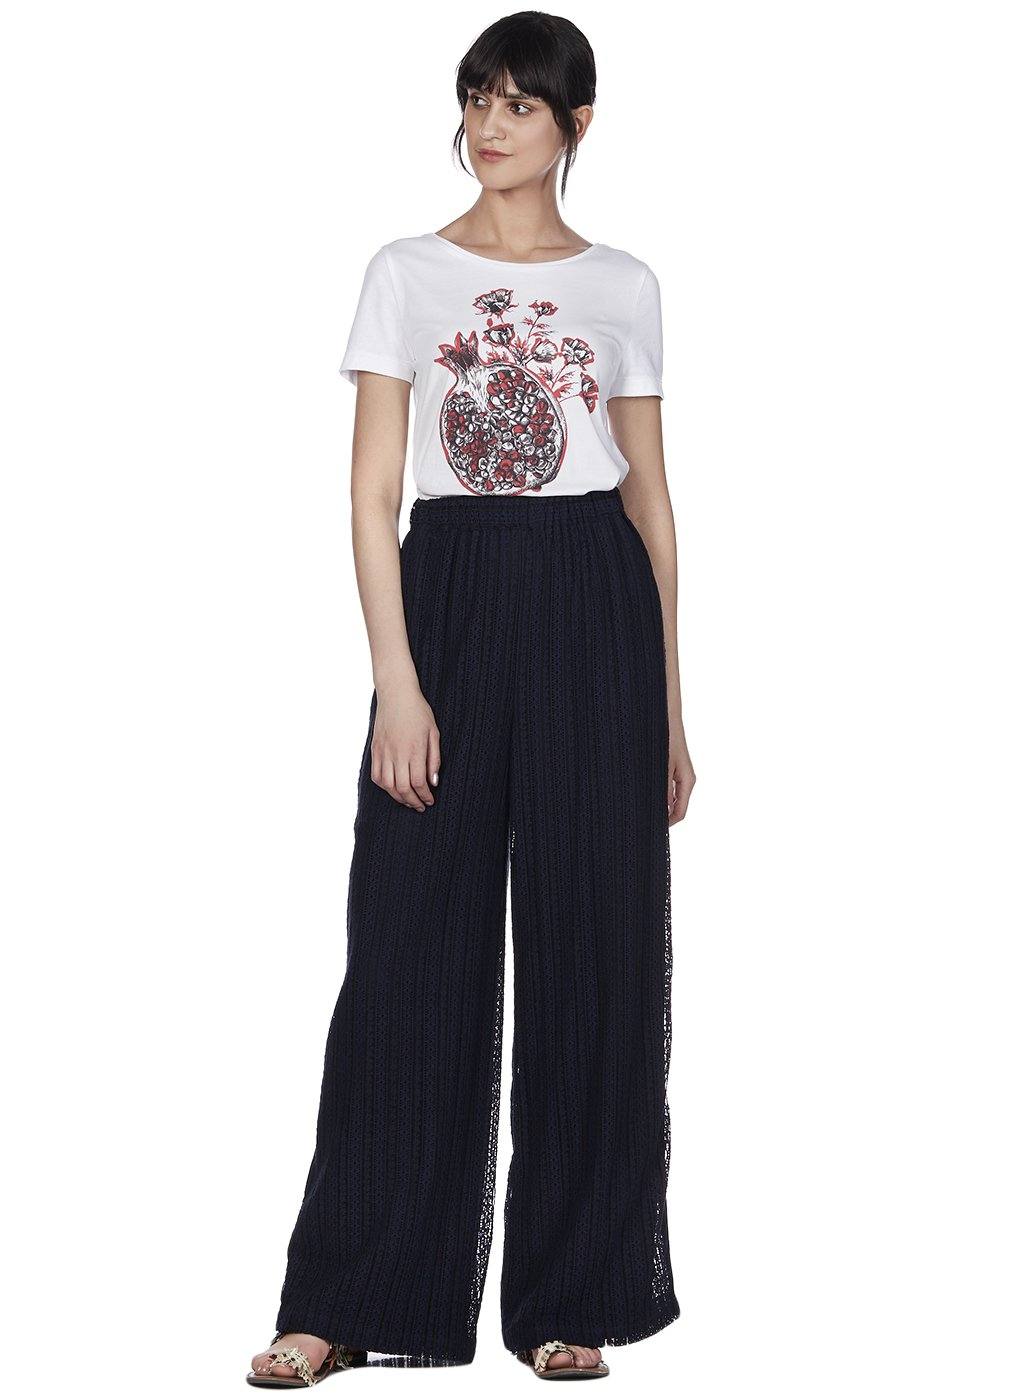 LOVE LACED TROUSERS - Genes online store 2020